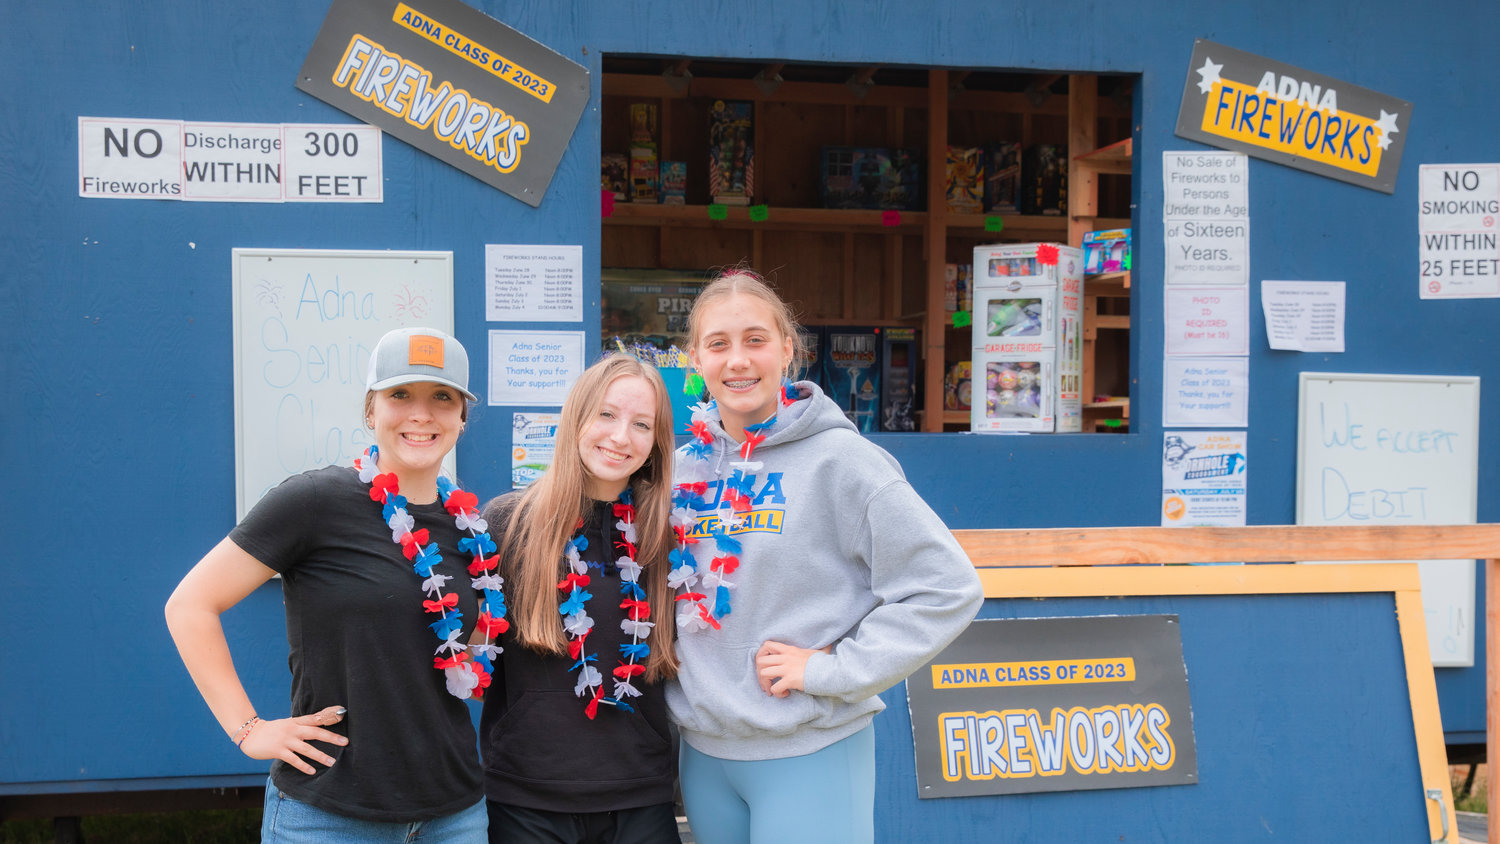 From left, Abby McAuley, Annie Murphy and Karlee VonMoos smile for a photo while selling fireworks and helping to raise money for the 2023 senior class at Adna High School Friday afternoon.